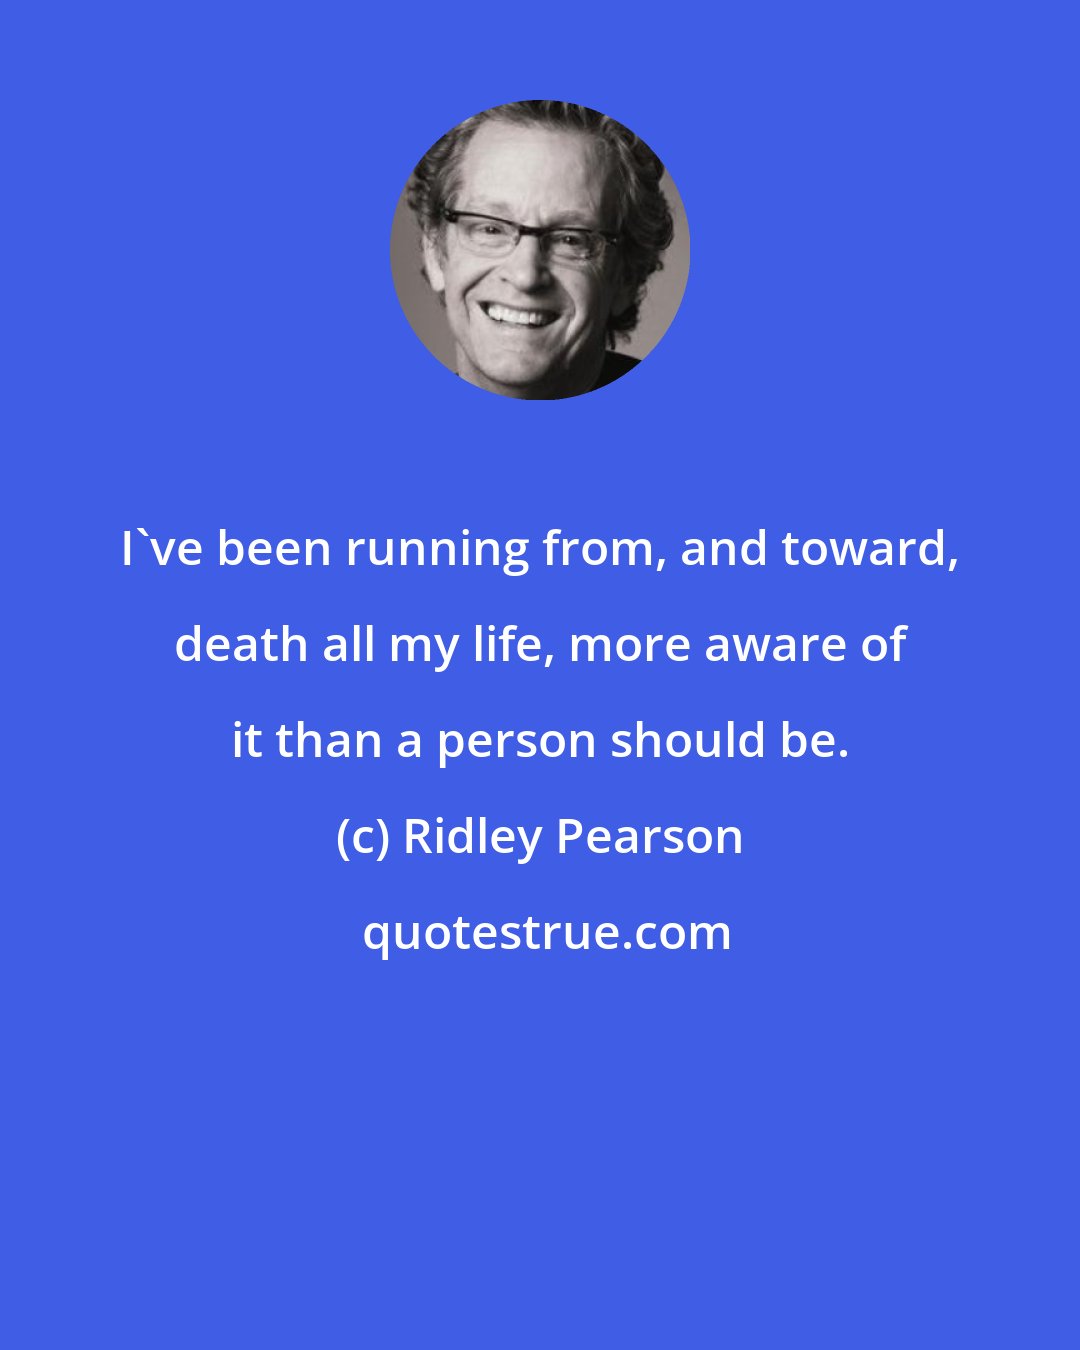 Ridley Pearson: I've been running from, and toward, death all my life, more aware of it than a person should be.